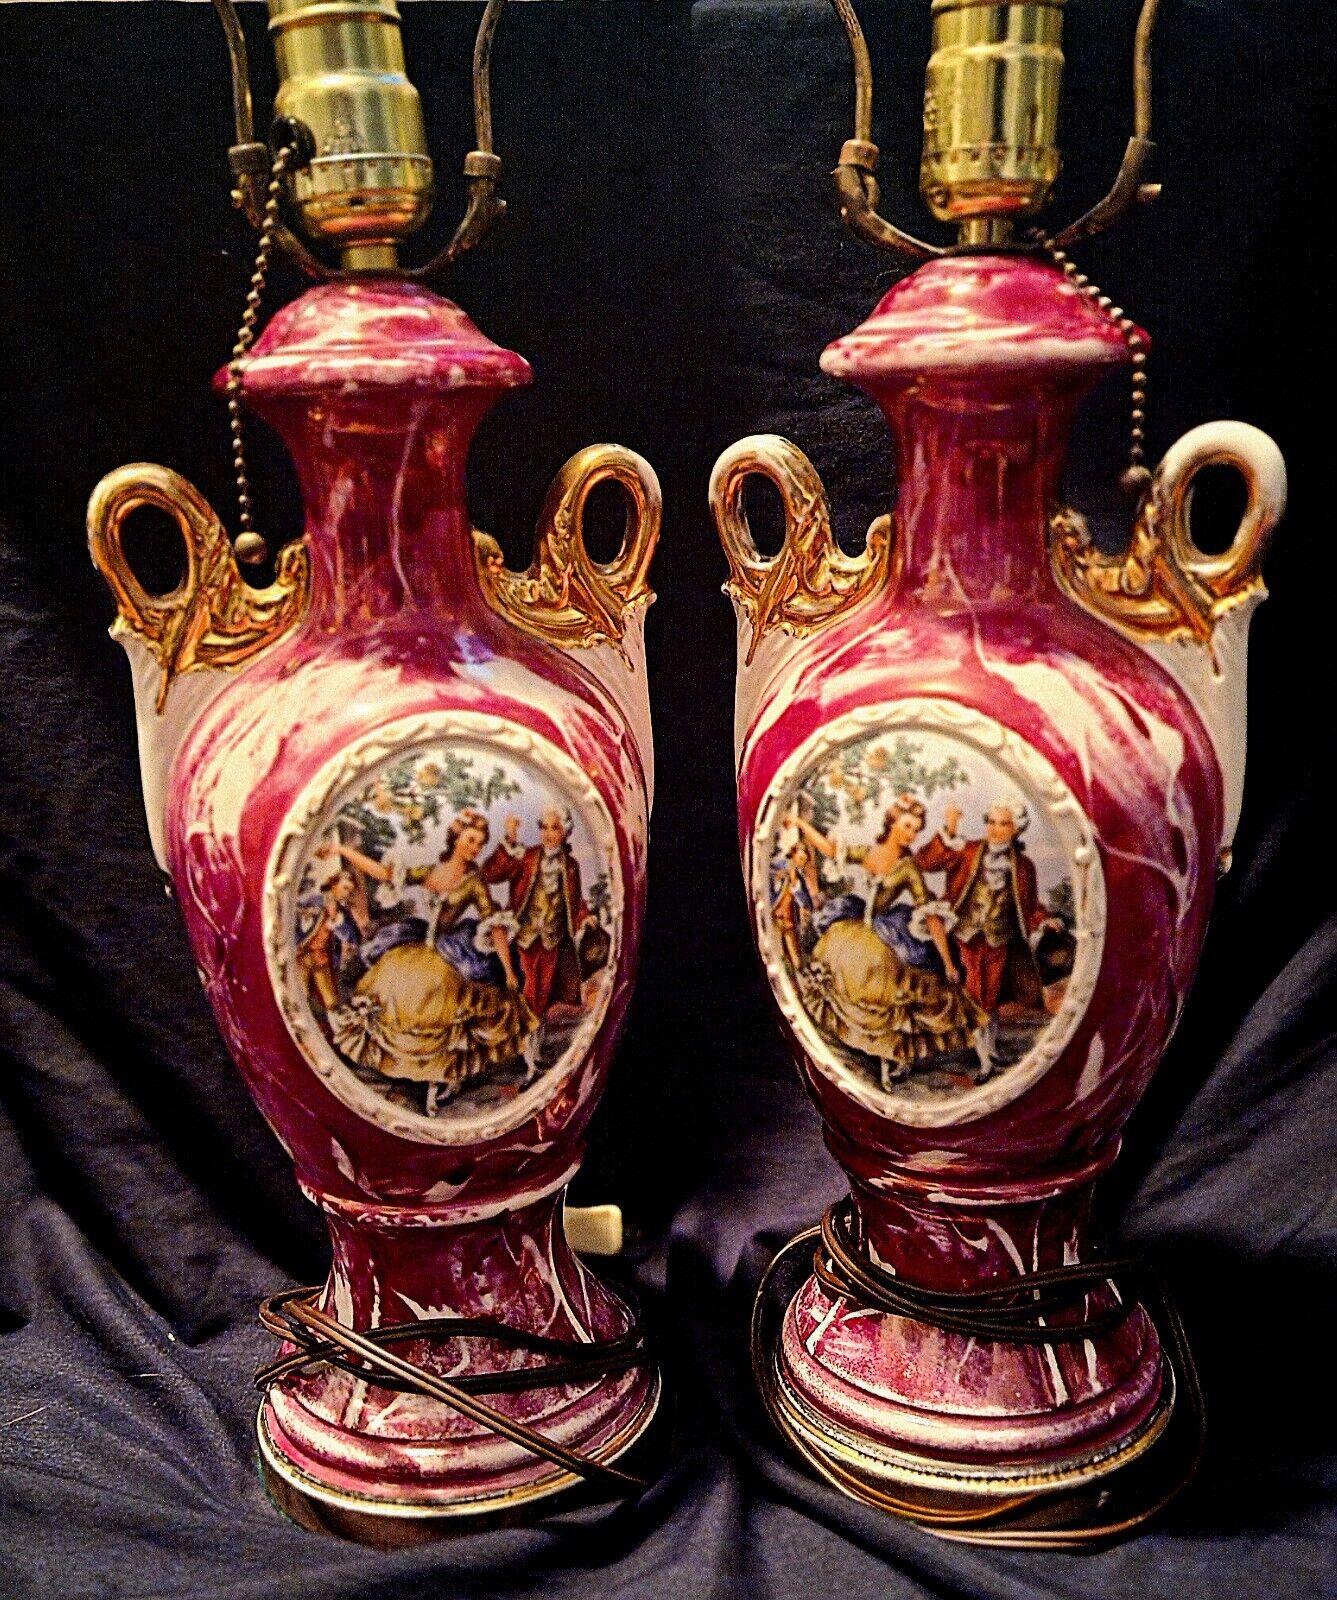 2 VICTORIAN VNTG Porcelain Lamps-George&Martha-ANTQ/ HAND PAINTED-shds incl